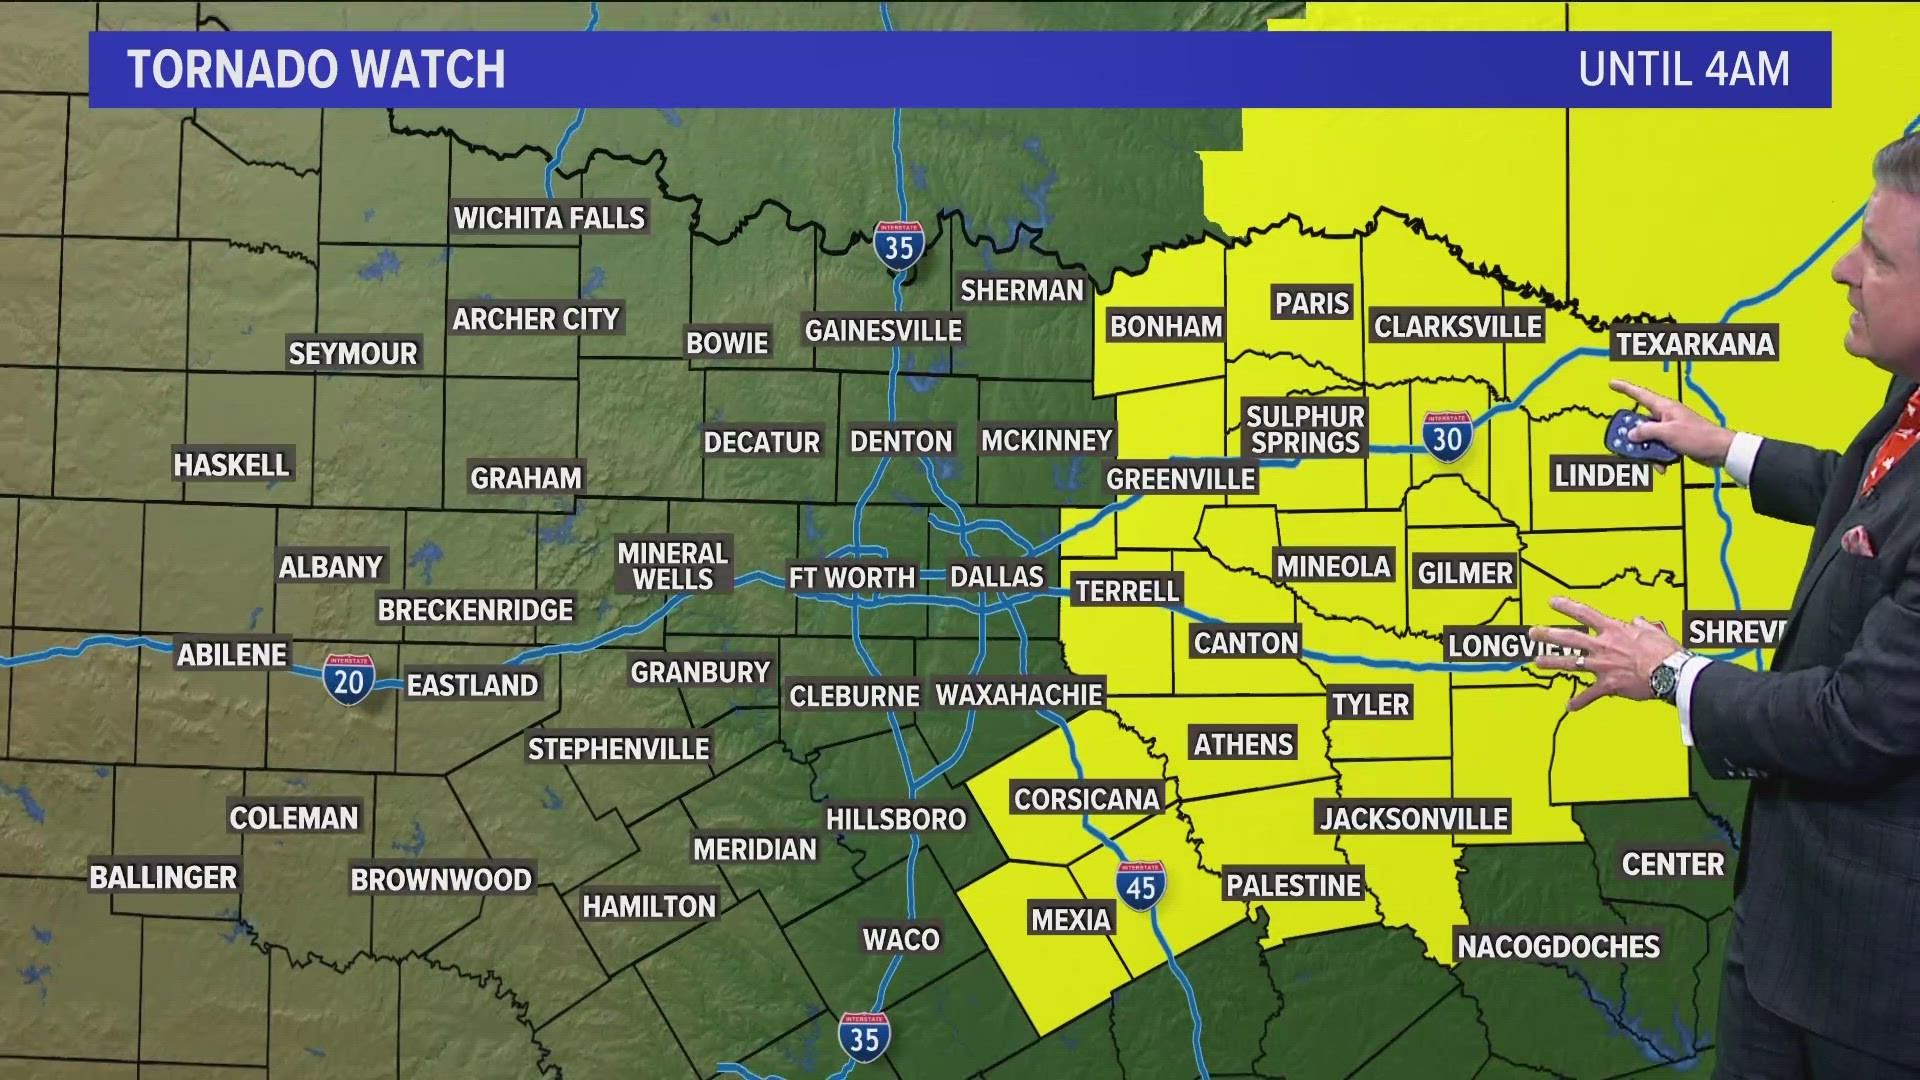 The tornado watch is in place until 4 a.m. Friday.